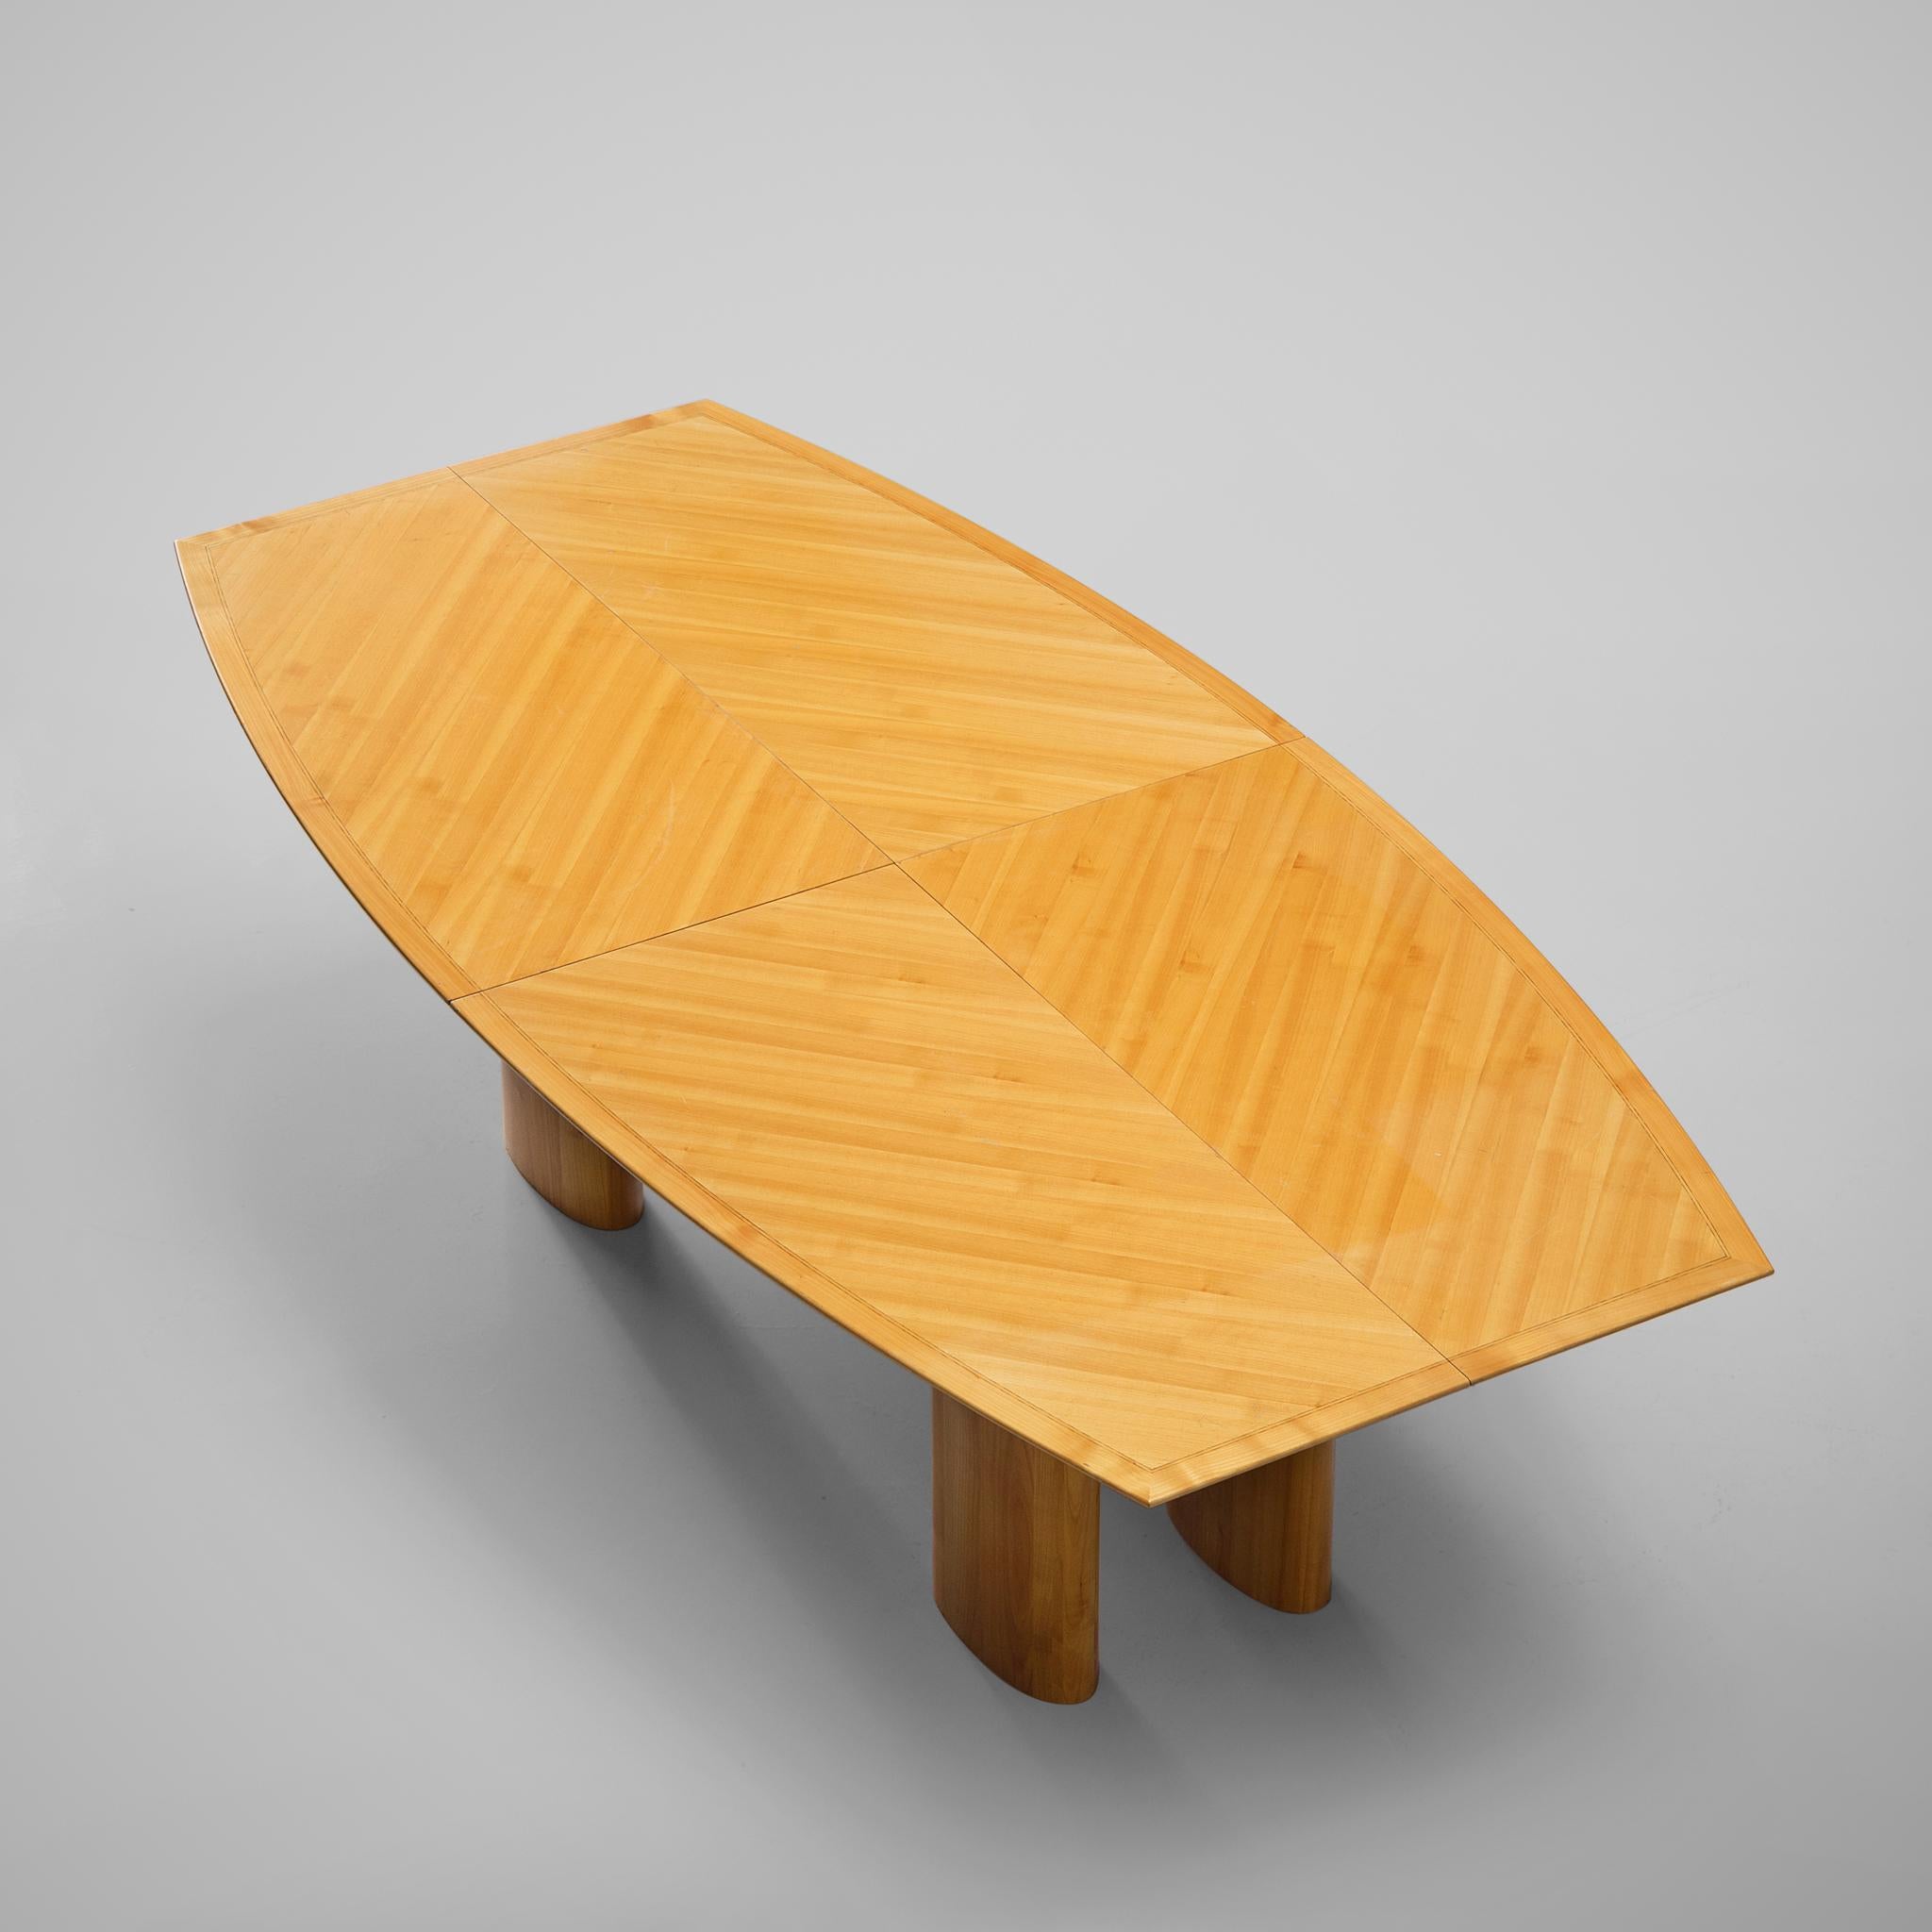 Italian Dining Table with Boat Shaped Top 1